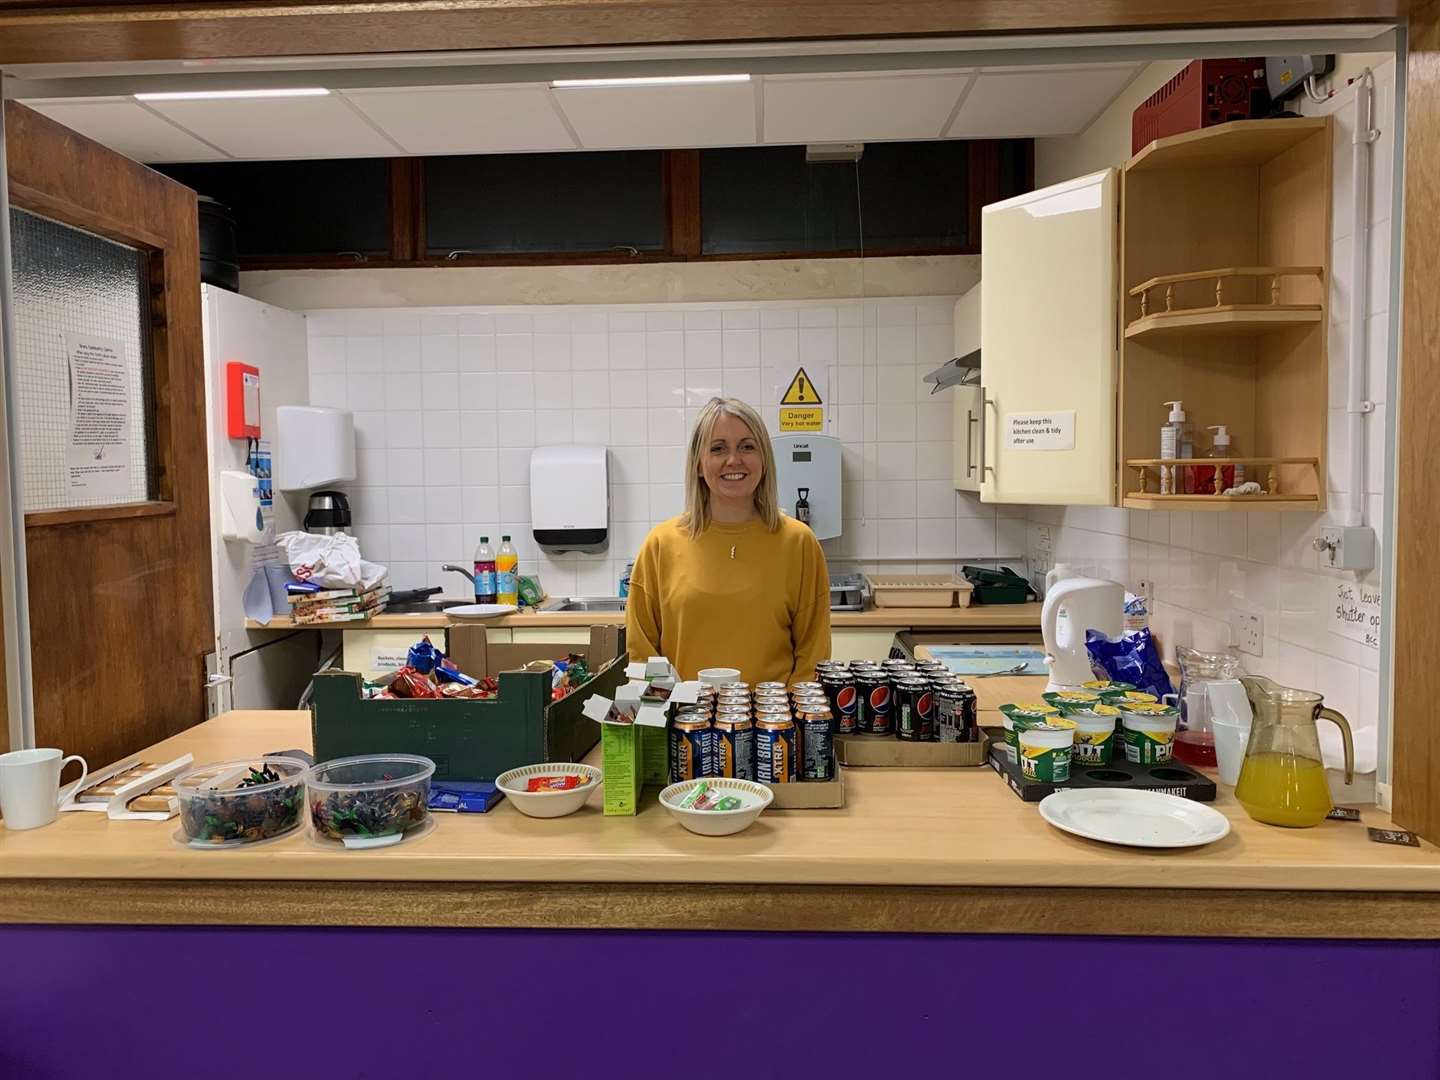 Sessional worker Eilidh Carter gets the soft drinks and snacks ready.